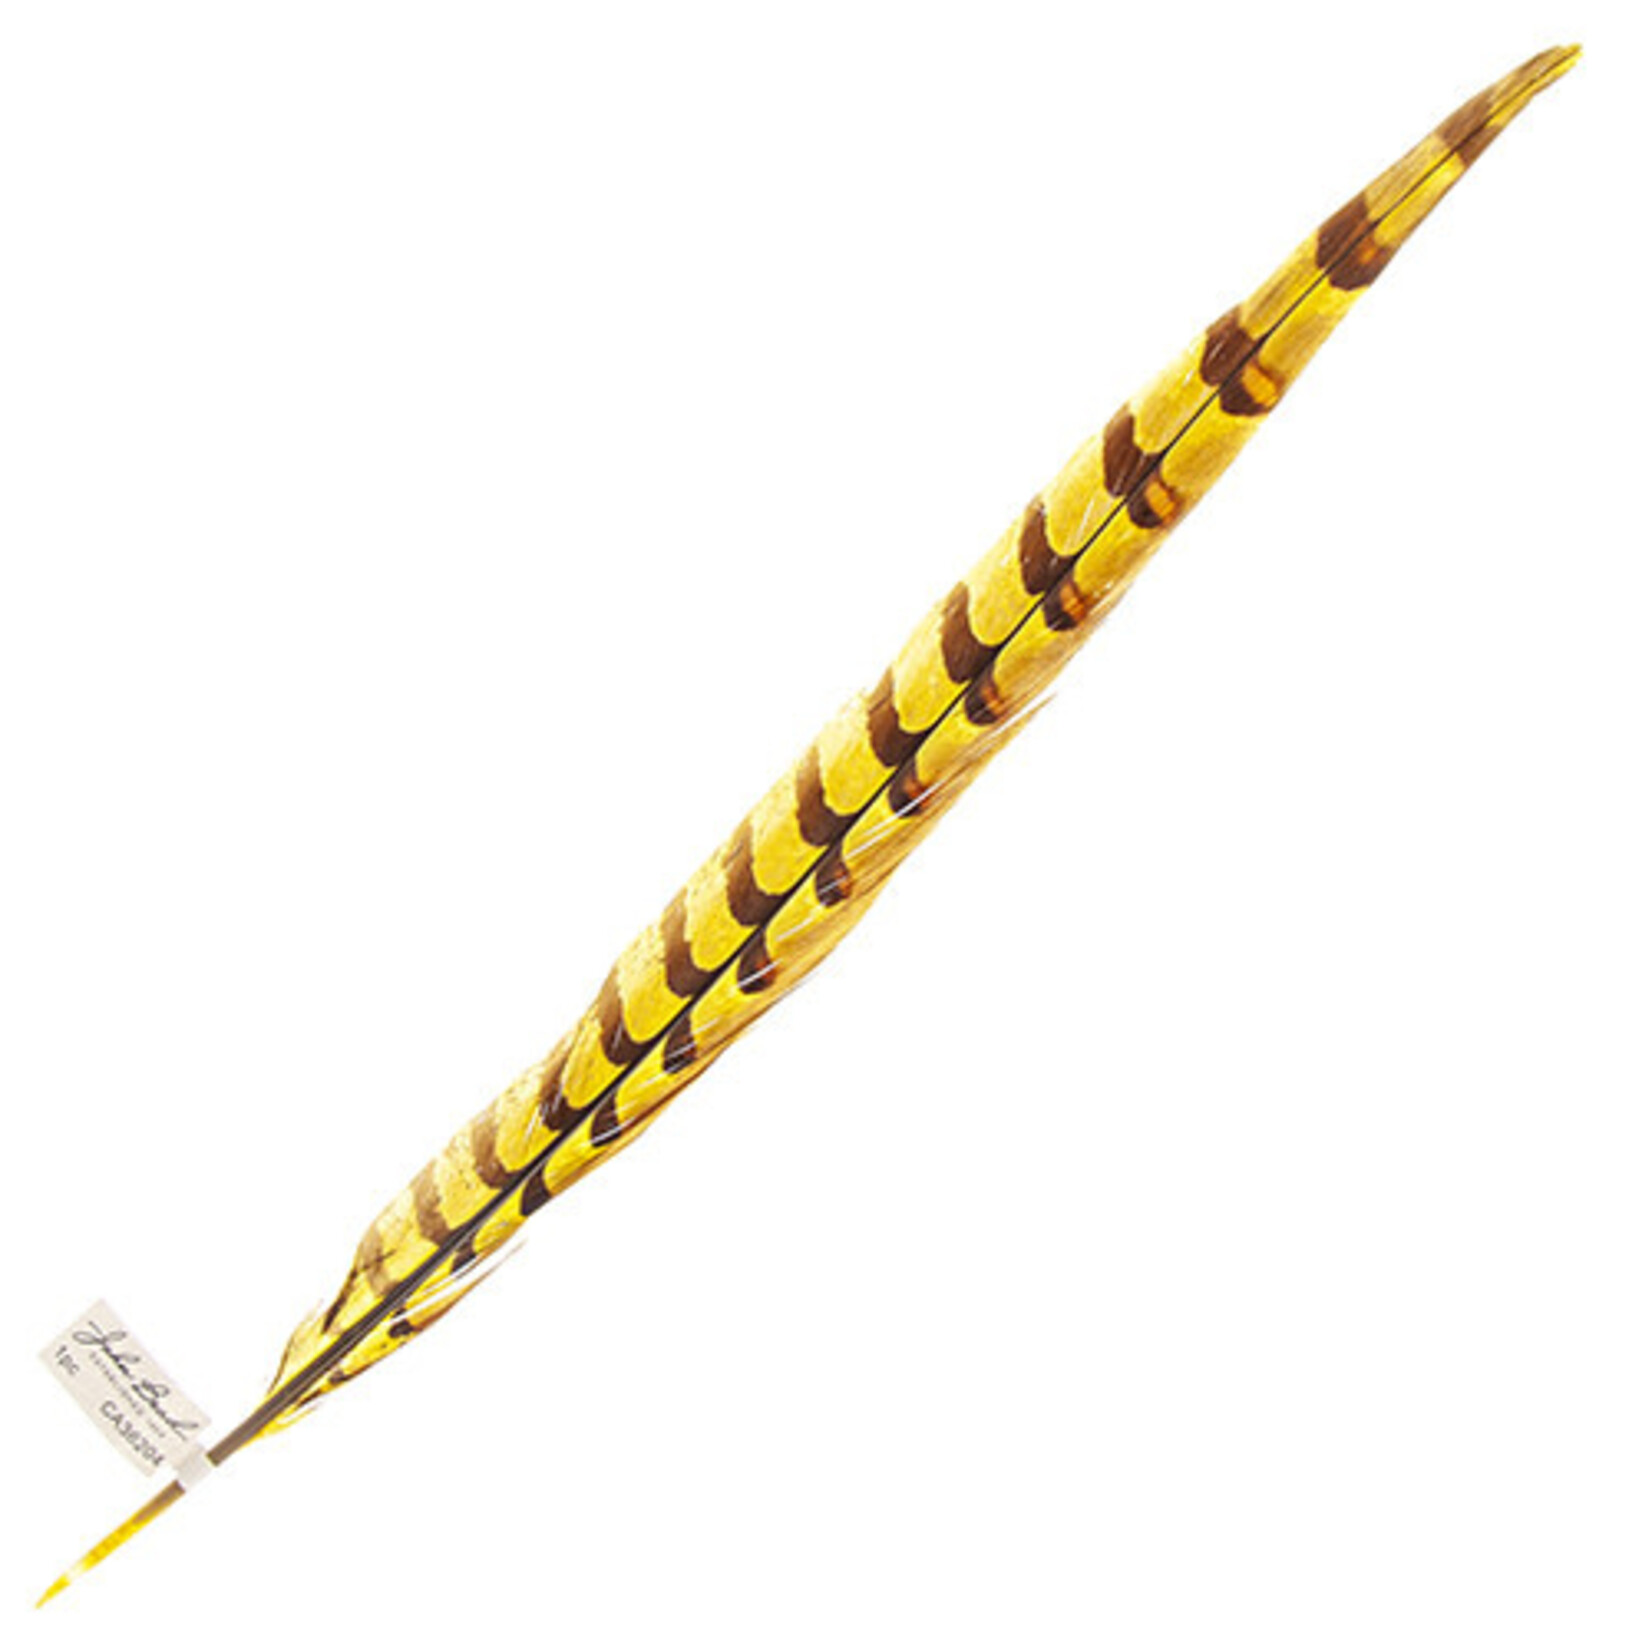 Reeves Pheasant Tail Yellow 20 - 25 Inch (1 Piece)